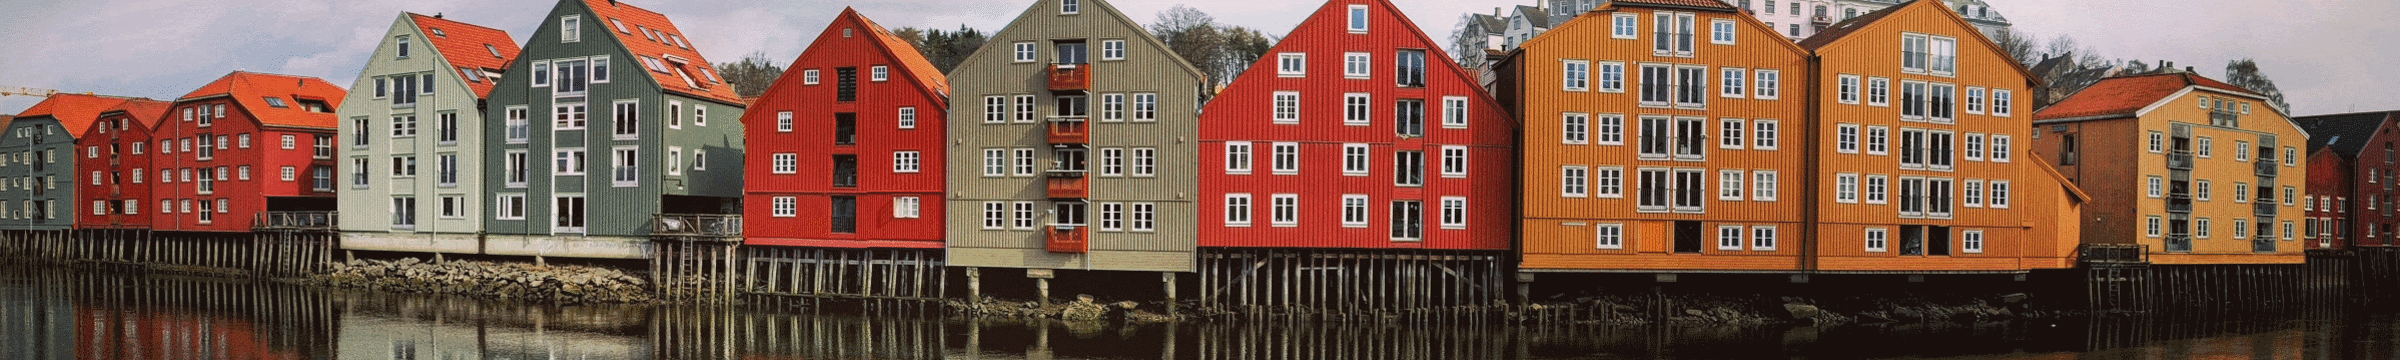 Coloured houses on river 